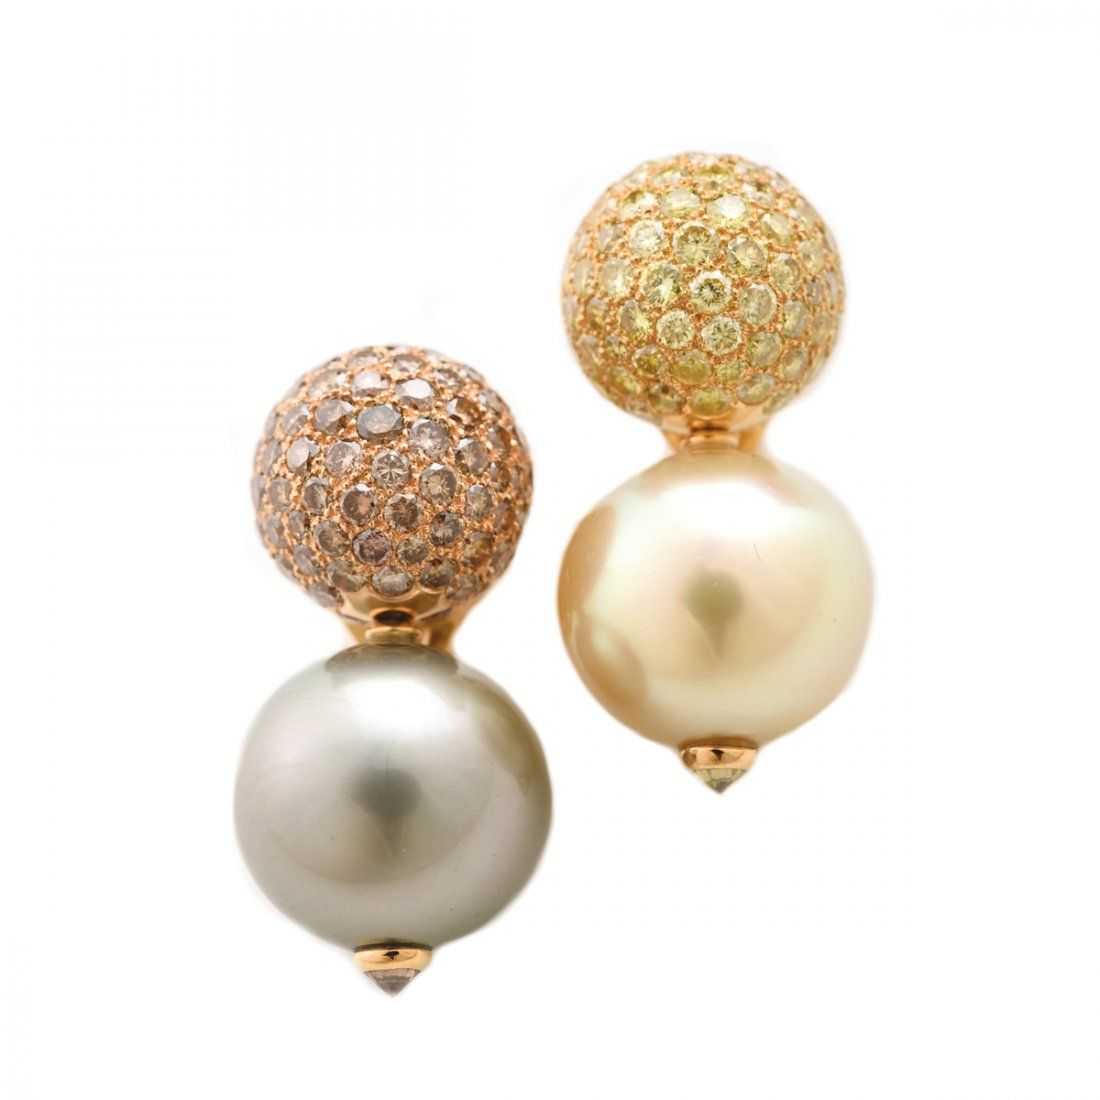 Chanel pearls: real or imitation, always in vogue